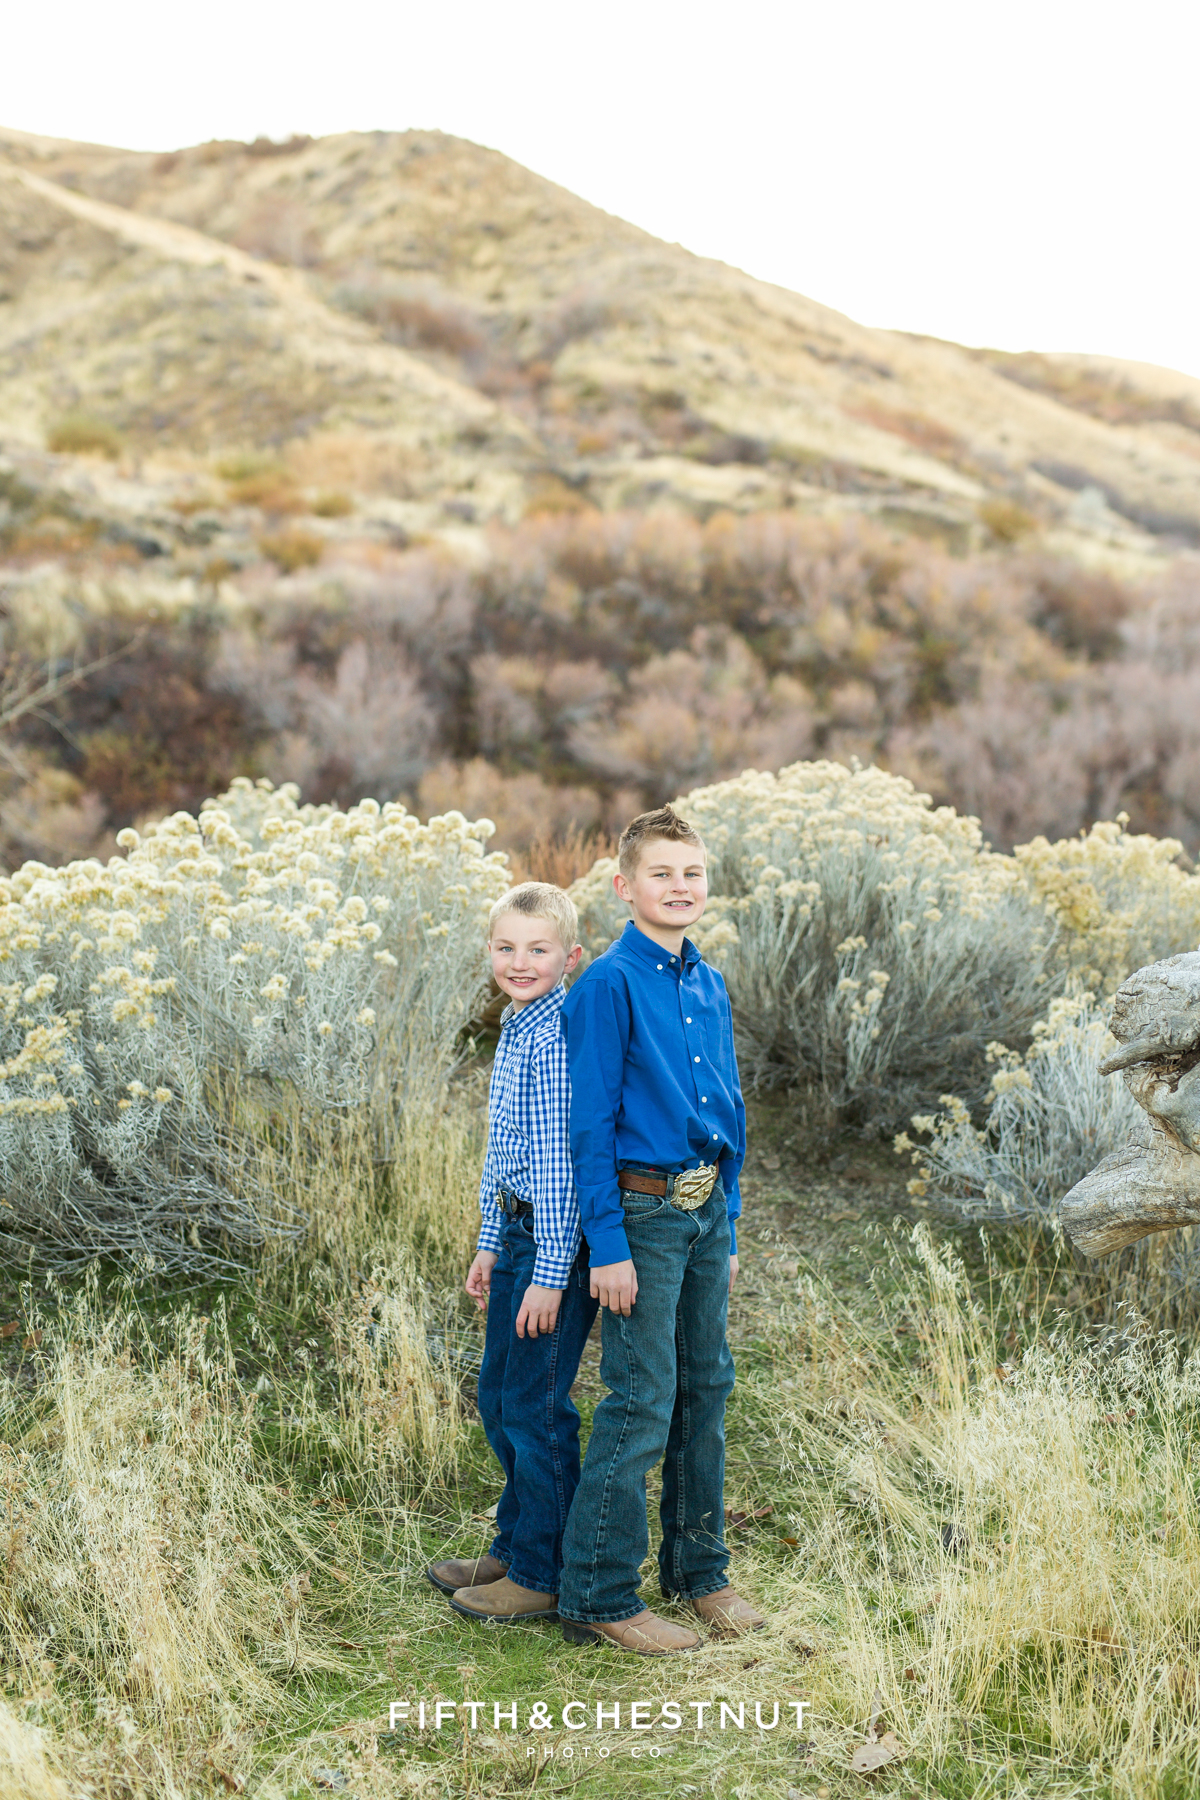 Reno Child Portraits at Mayberry Park by Reno Child Portrait Photographer